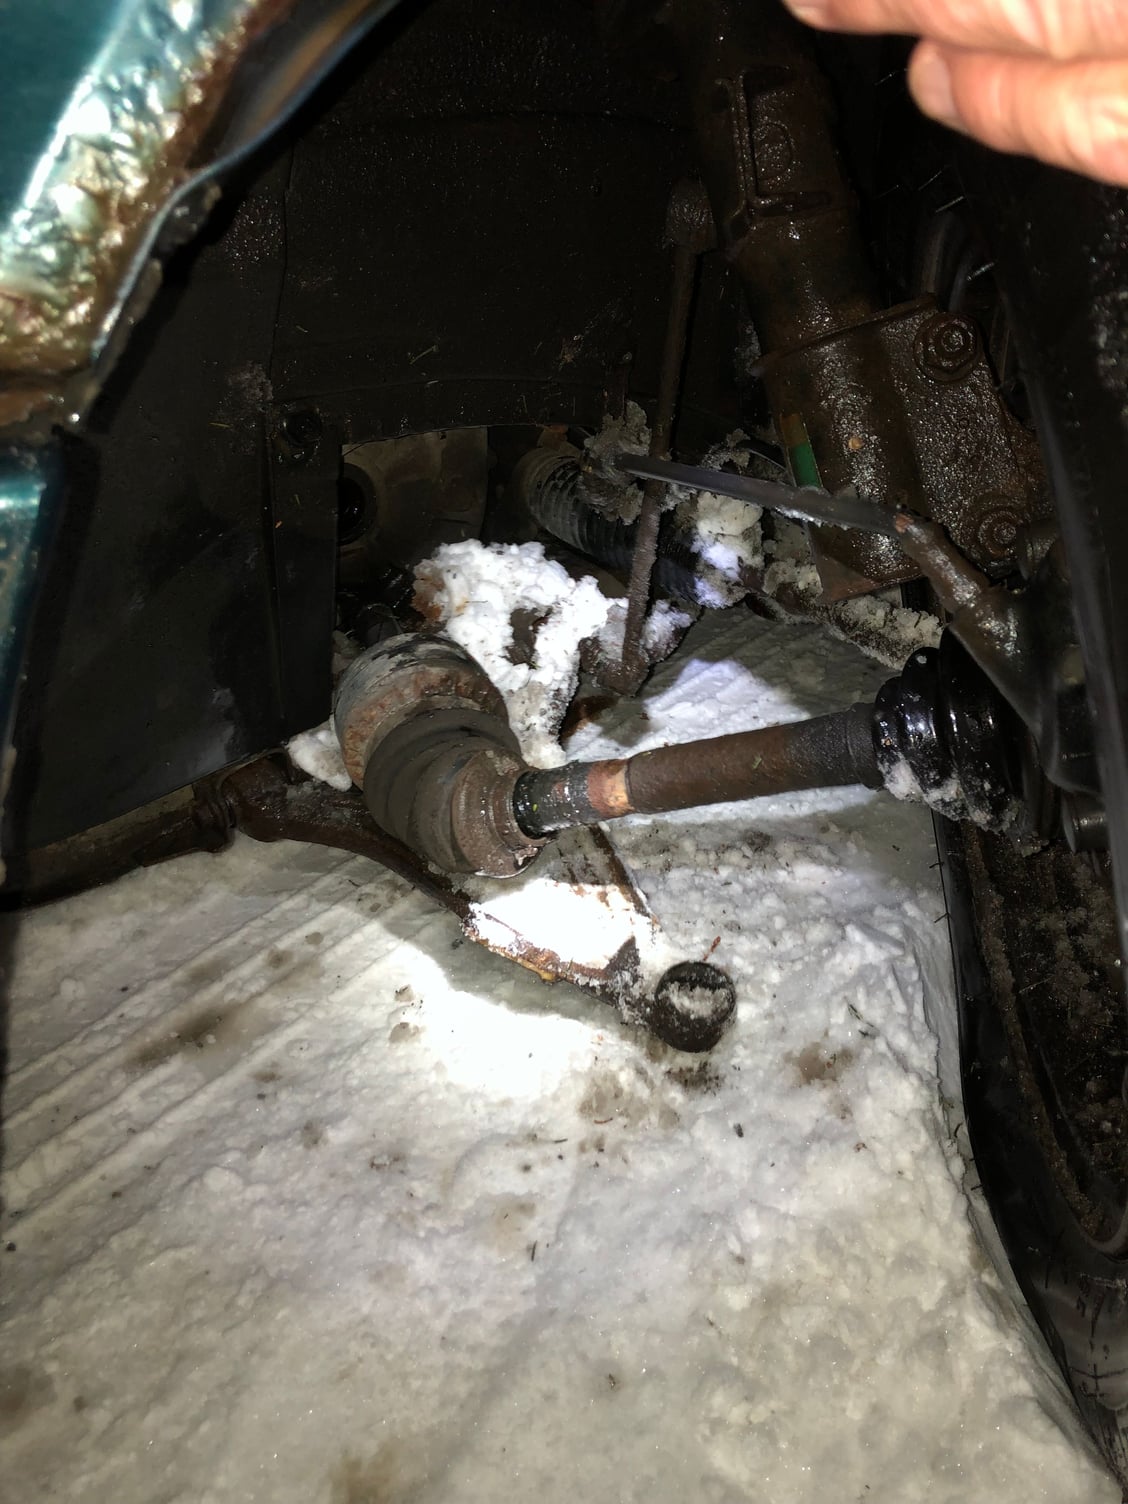 control arm ball joint broken while driving - Volvo Forums - Volvo